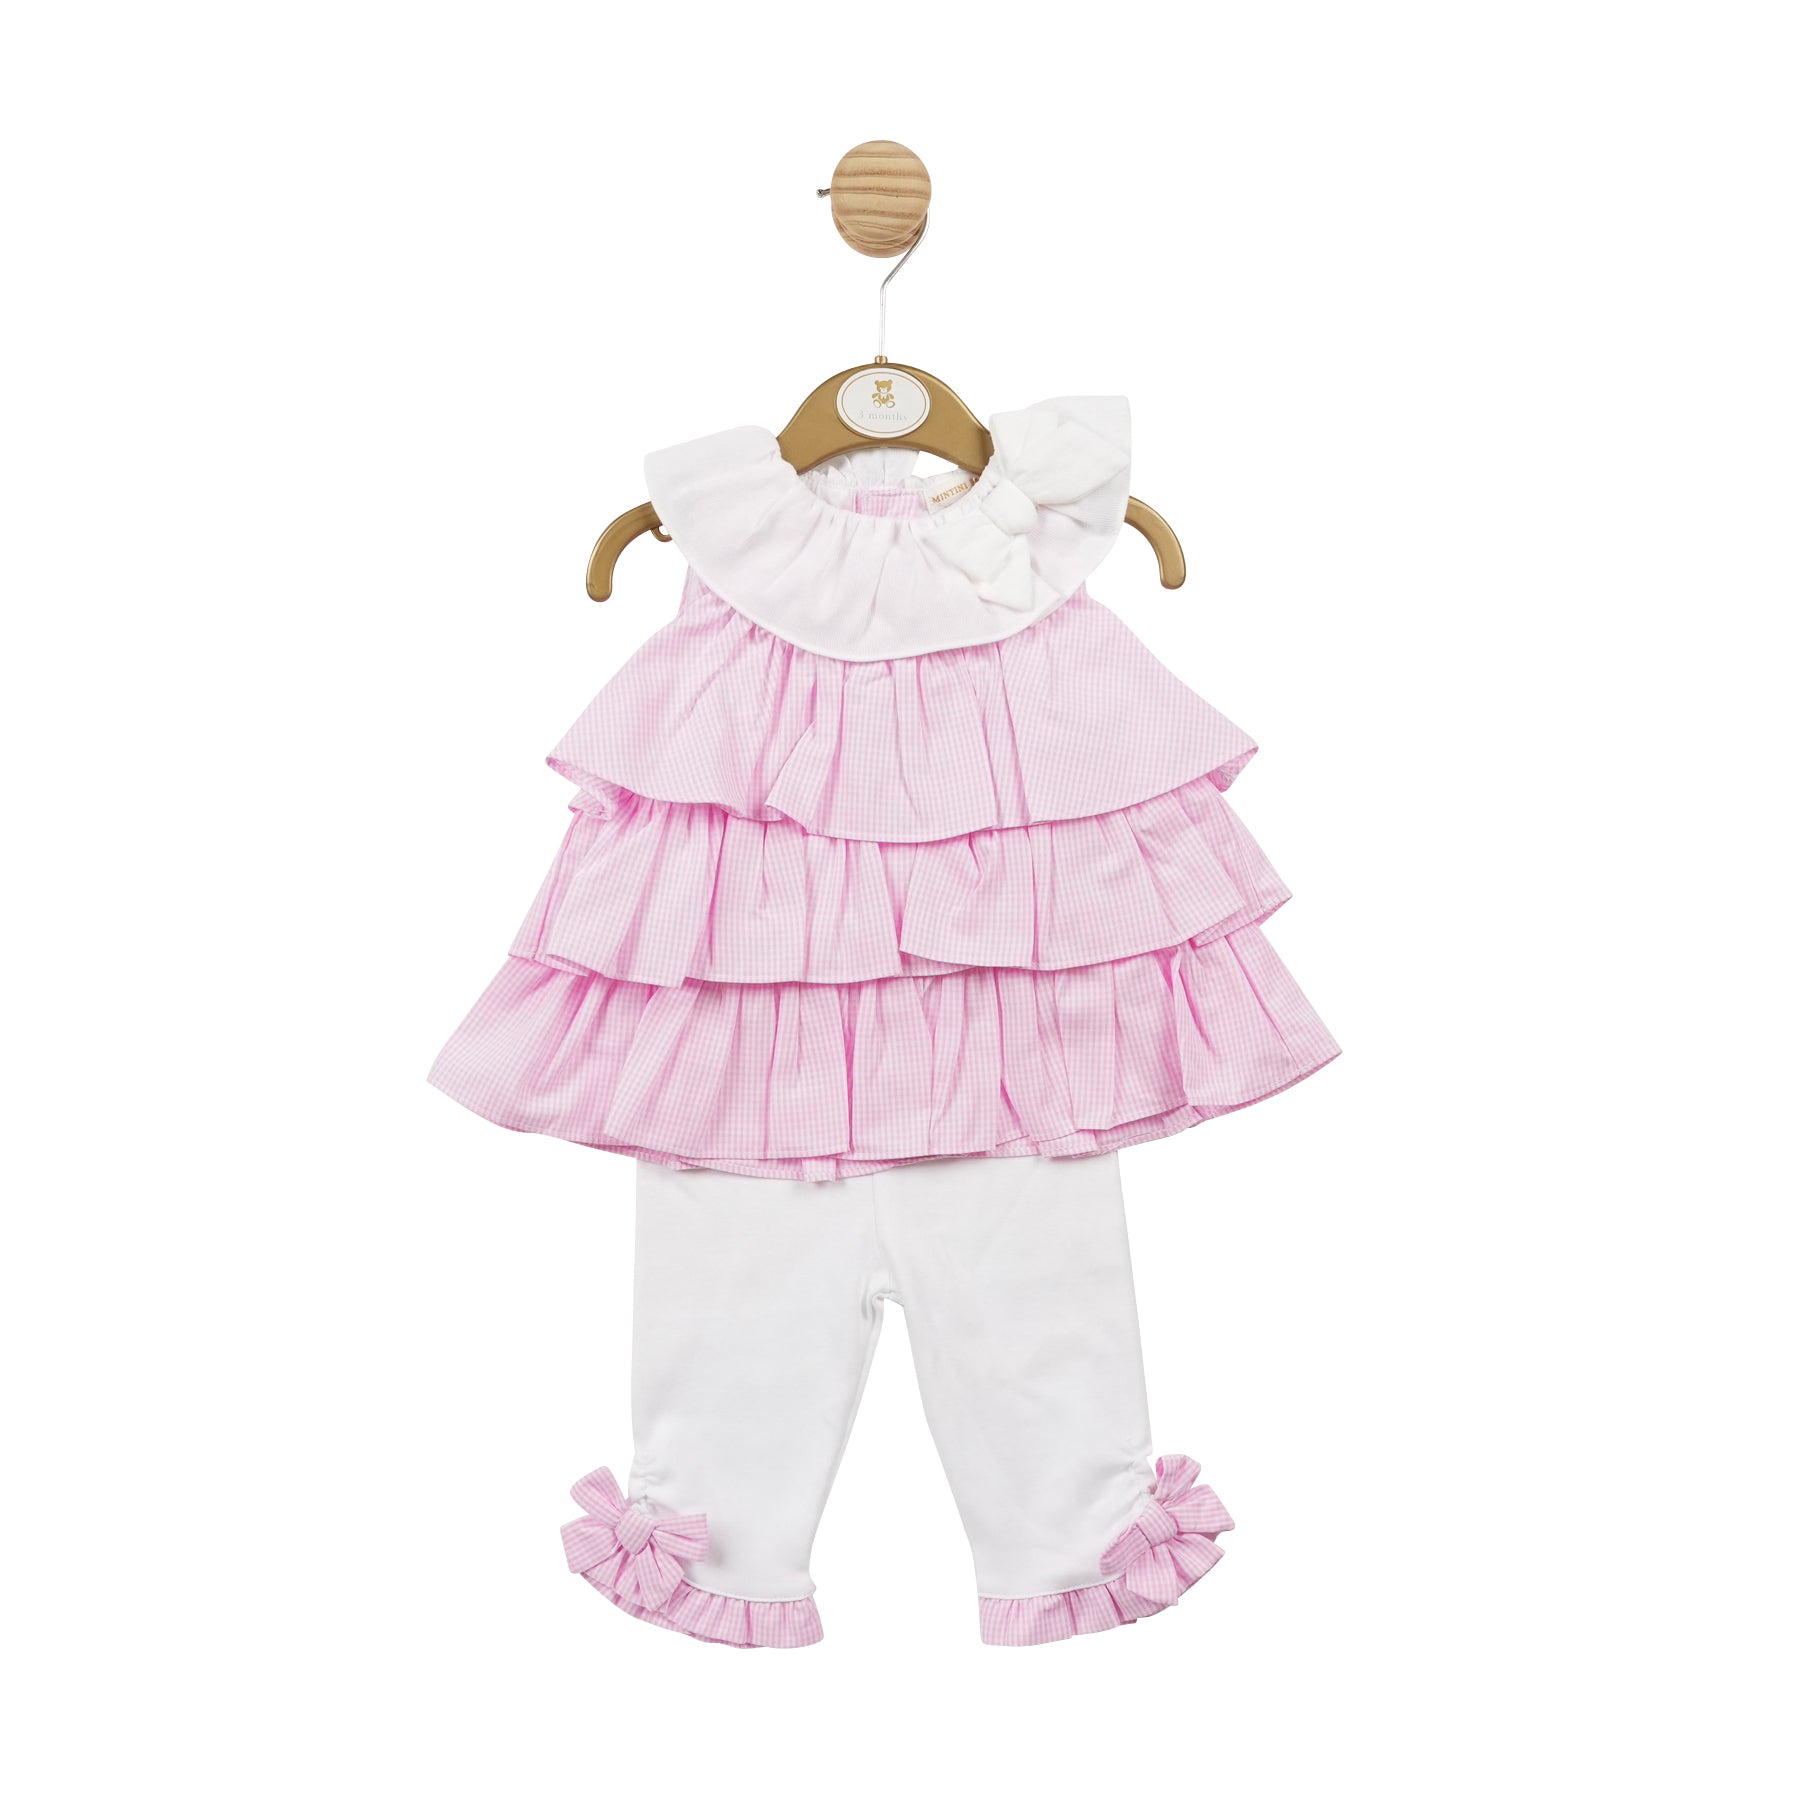 This Mintini Baby girls' tunic and legging set is perfect for spring and summer. The soft pink and white gingham pattern is both adorable and stylish, making your little one stand out. The top is ruffled with a white collar and bow detail, and the leggings are in white with pink frill and bow detail around the ankle. With sizes from 3 months up to 5 years old, this set is ideal for matching sisters and can be worn for any occasion.